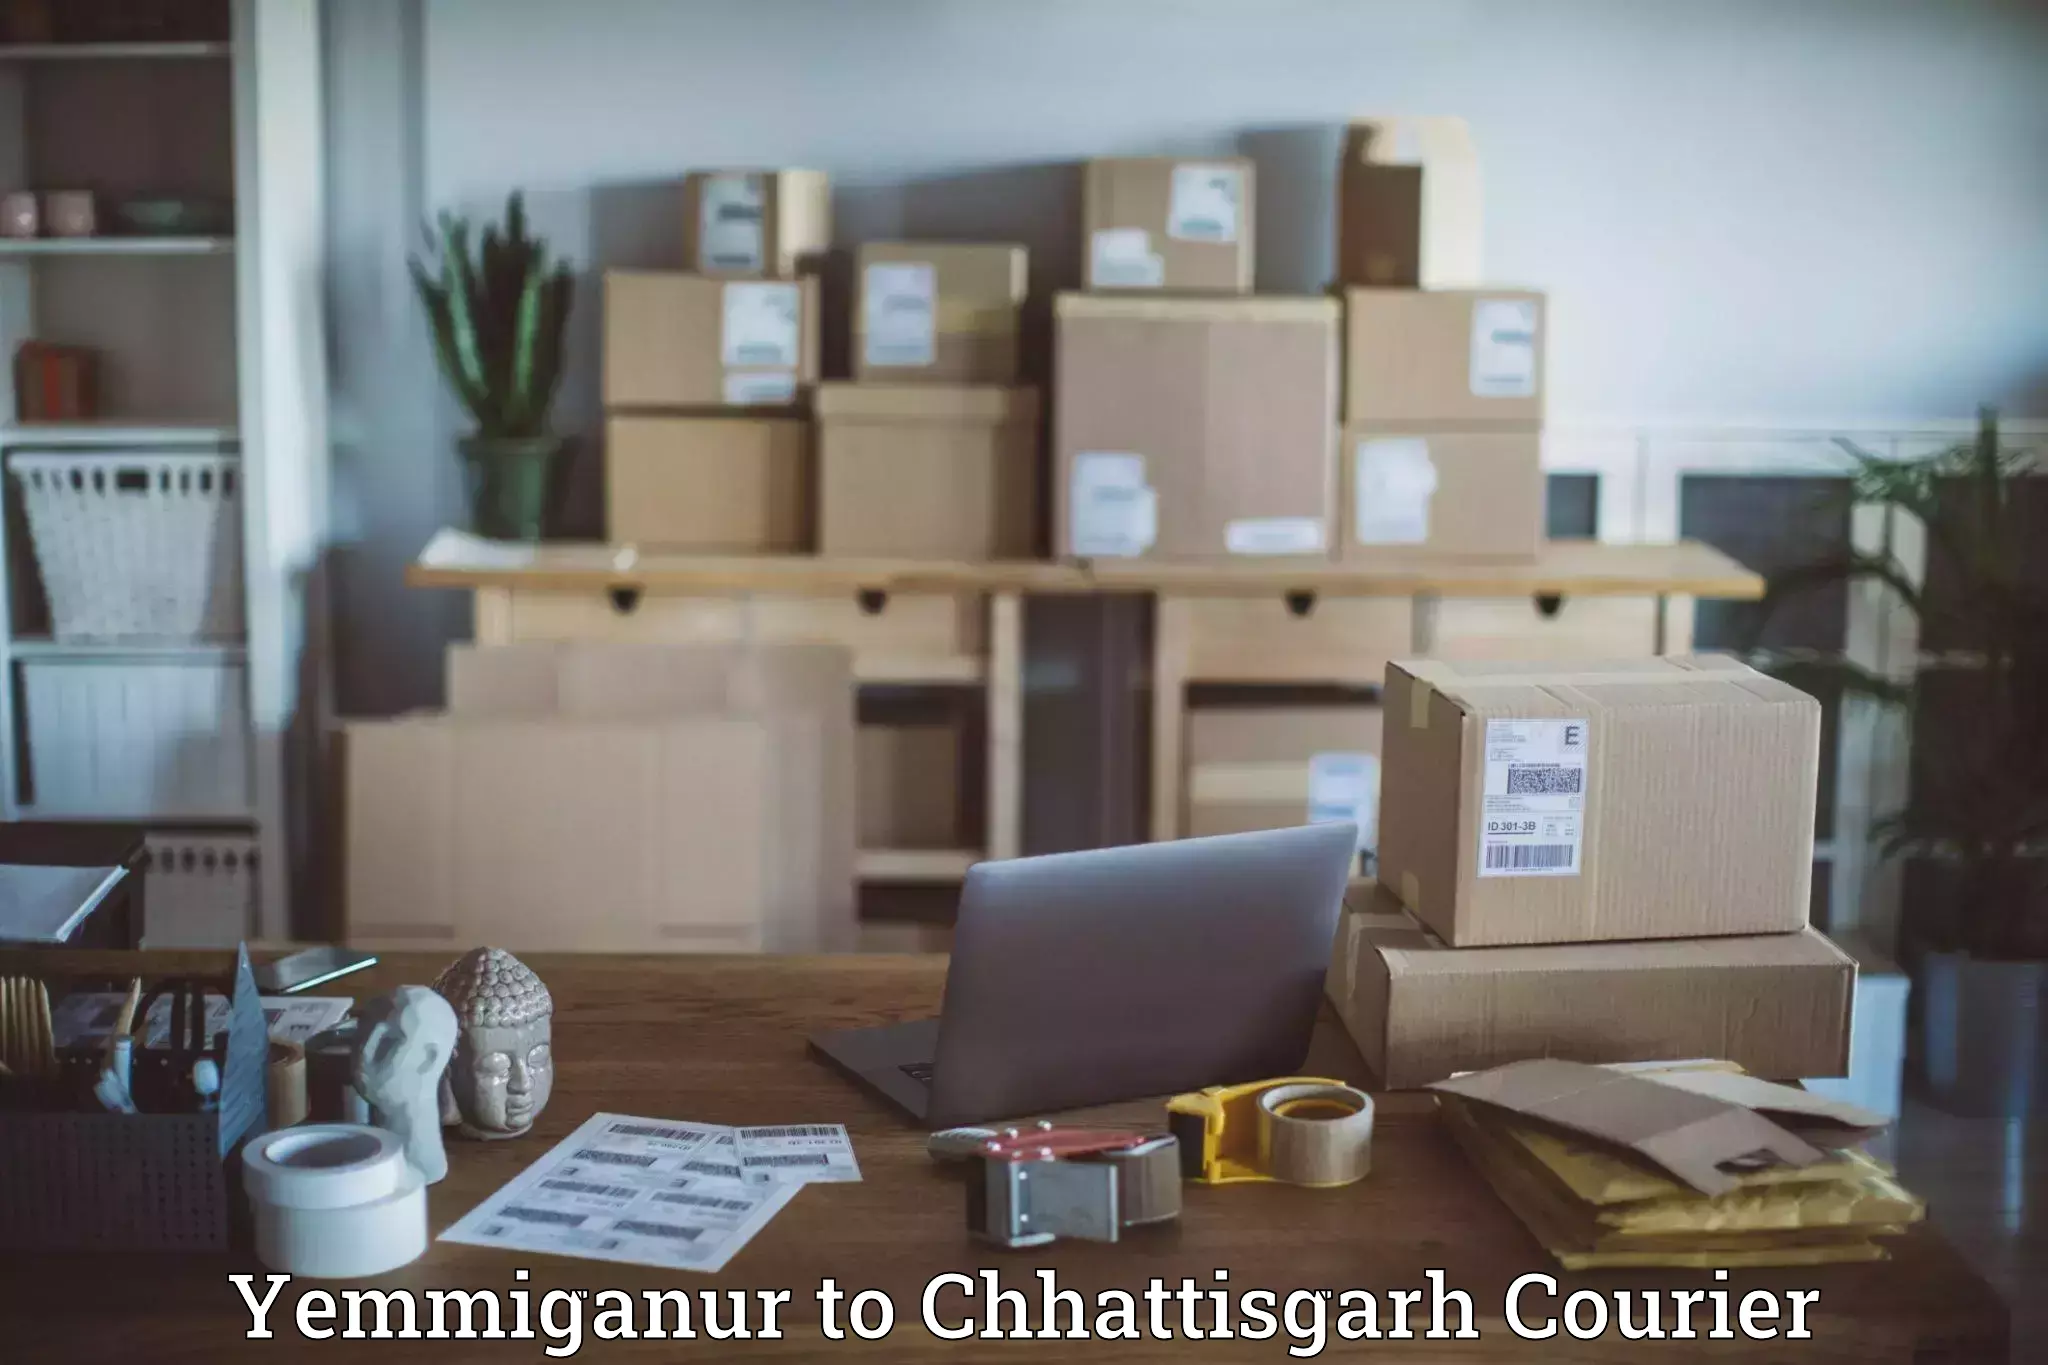 Holiday shipping services in Yemmiganur to Patna Chhattisgarh